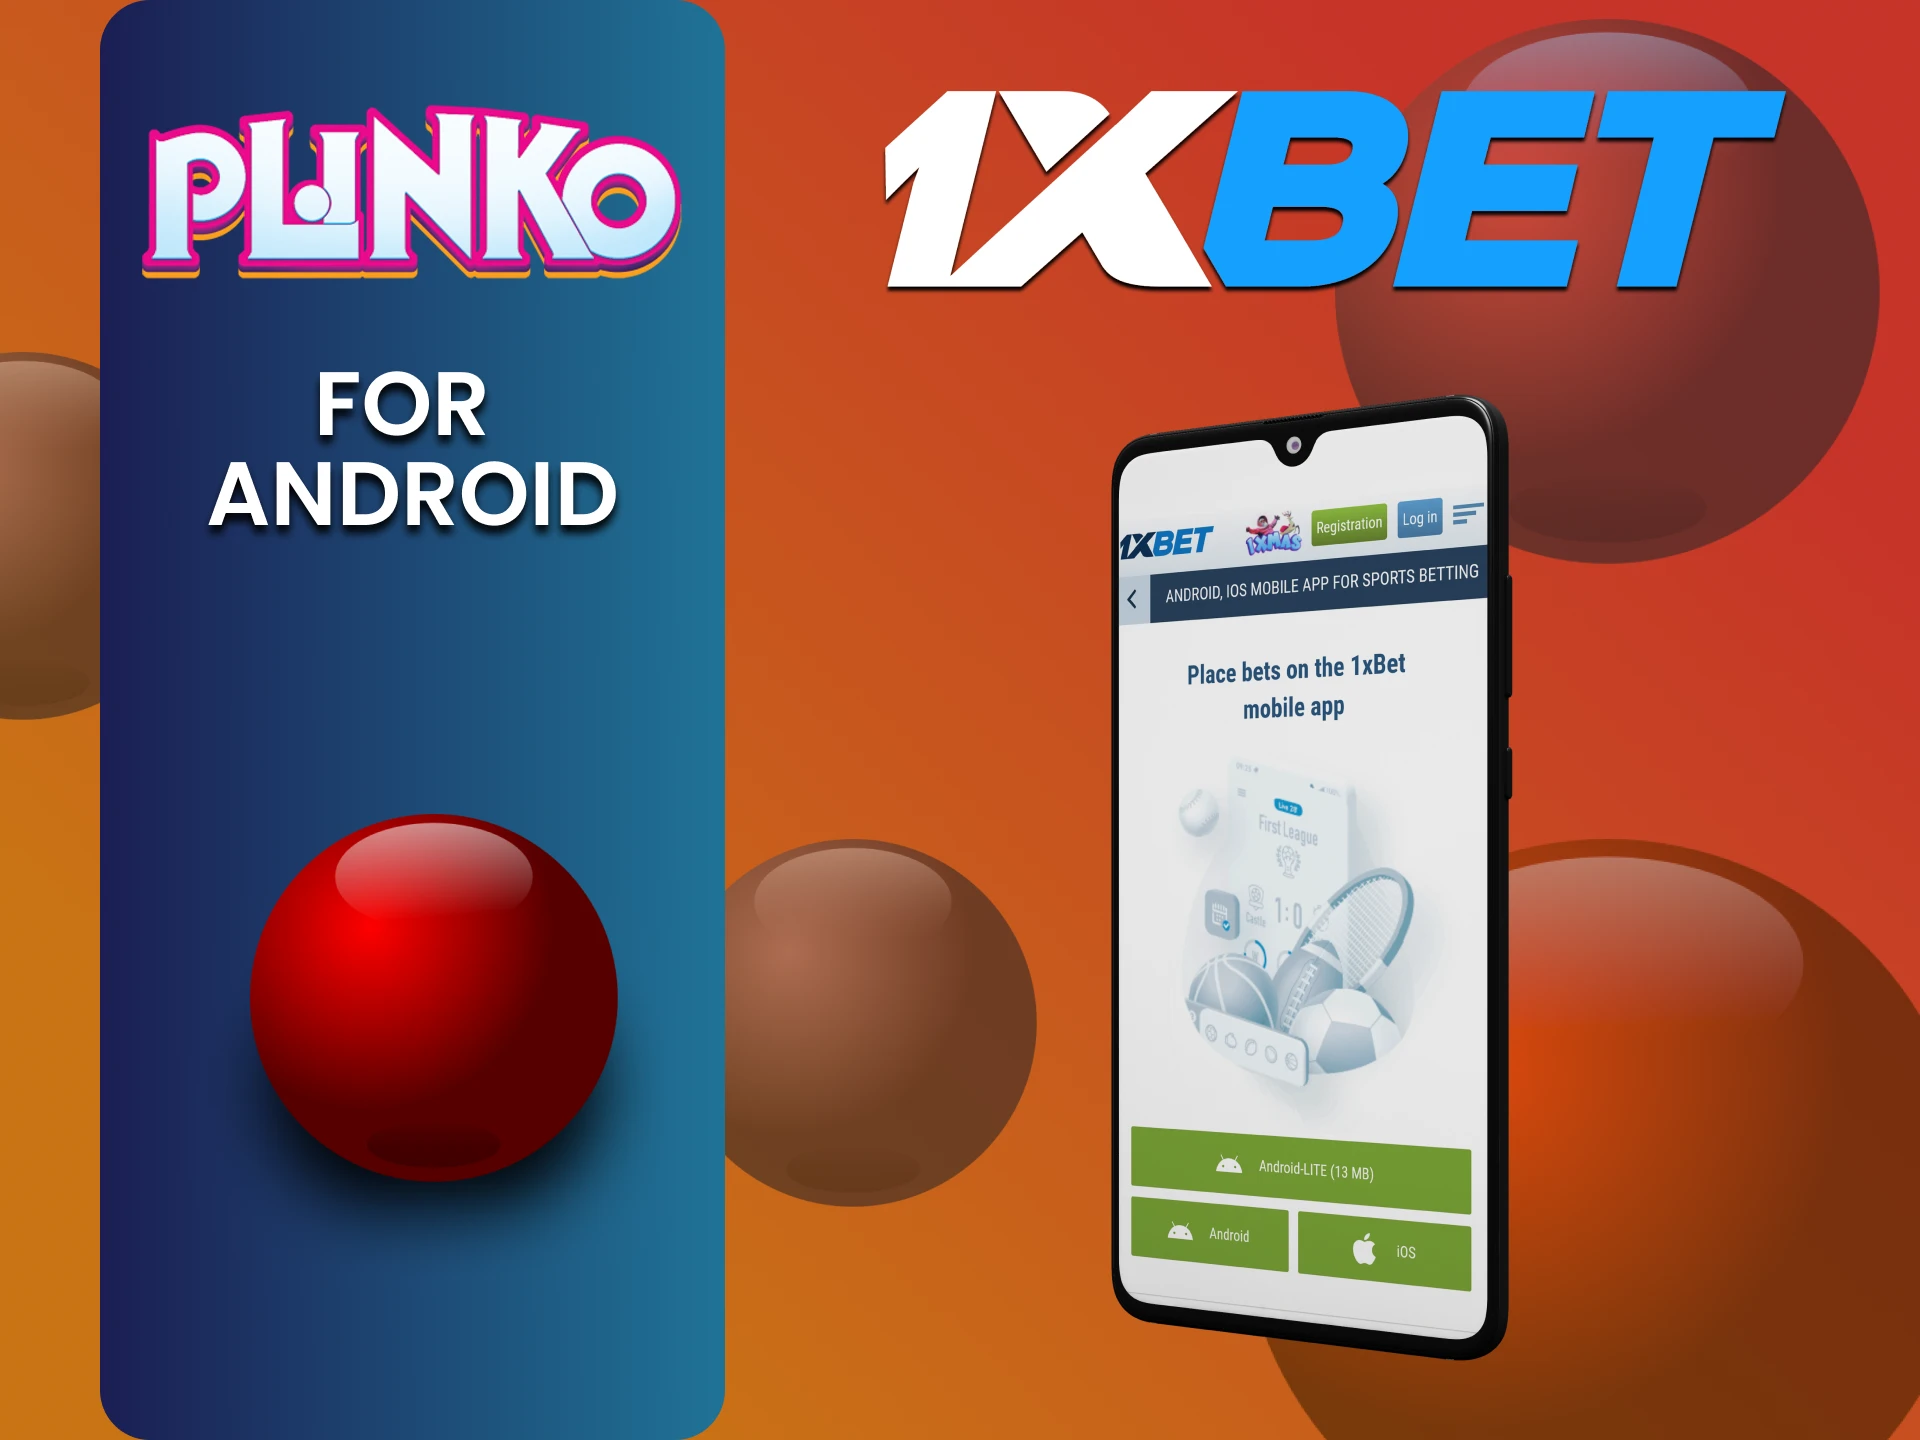 Download the 1xbet app to play Plinko on Android.